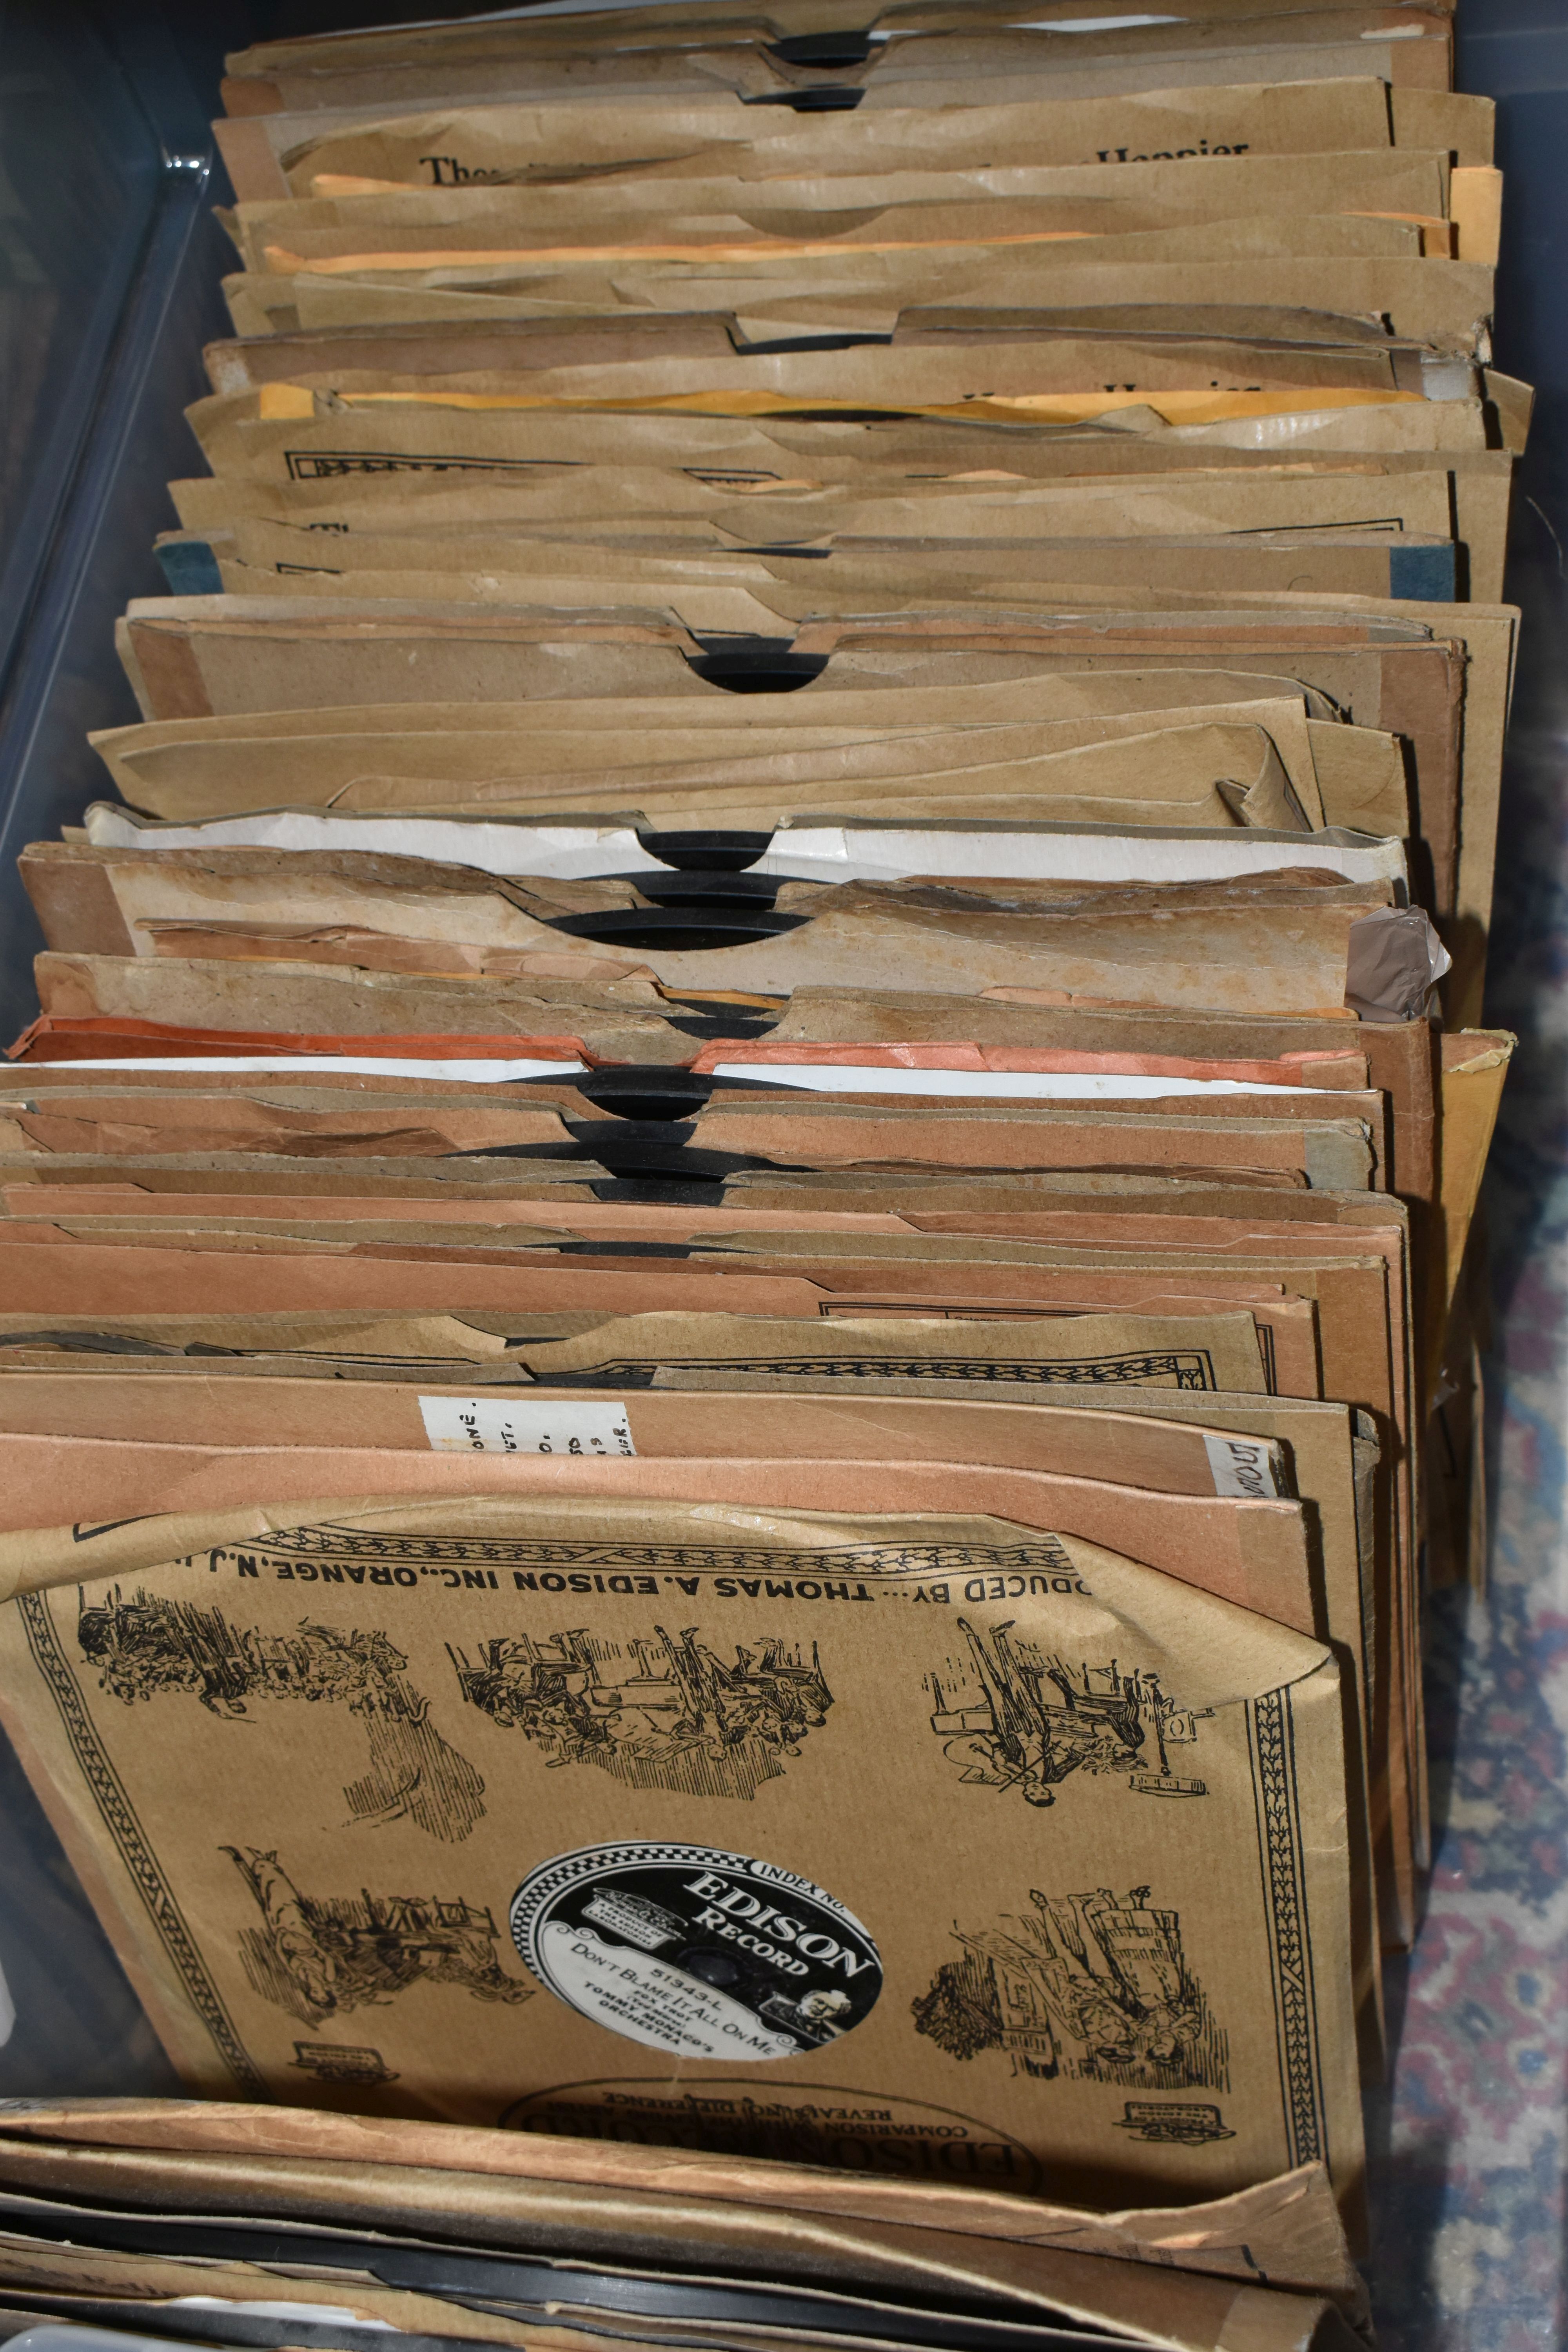 TWO BOXES OF EDISON DISC RECORDS, styles include orchestral, ragtime, music hall etc - Image 5 of 6